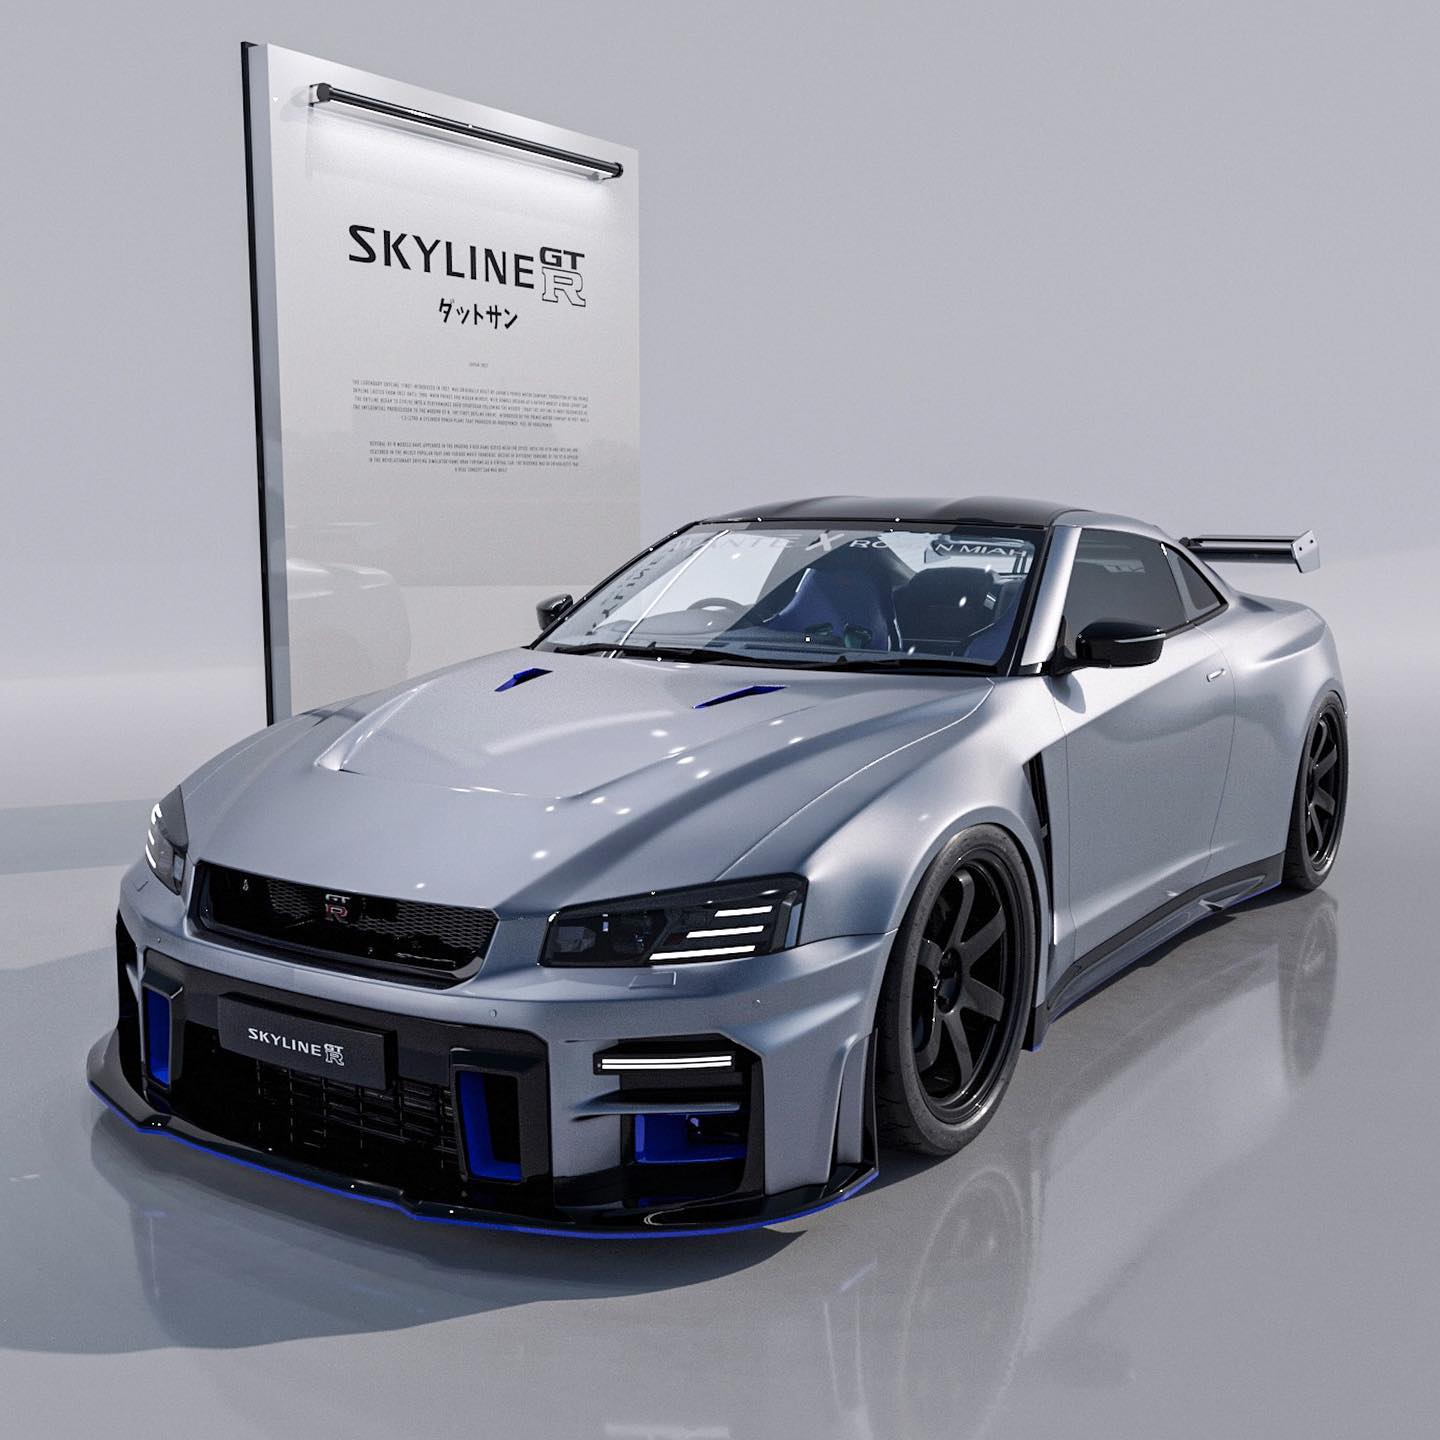 2023 Nissan GT-R R36 Comes with a Surprising Change - New Nissan